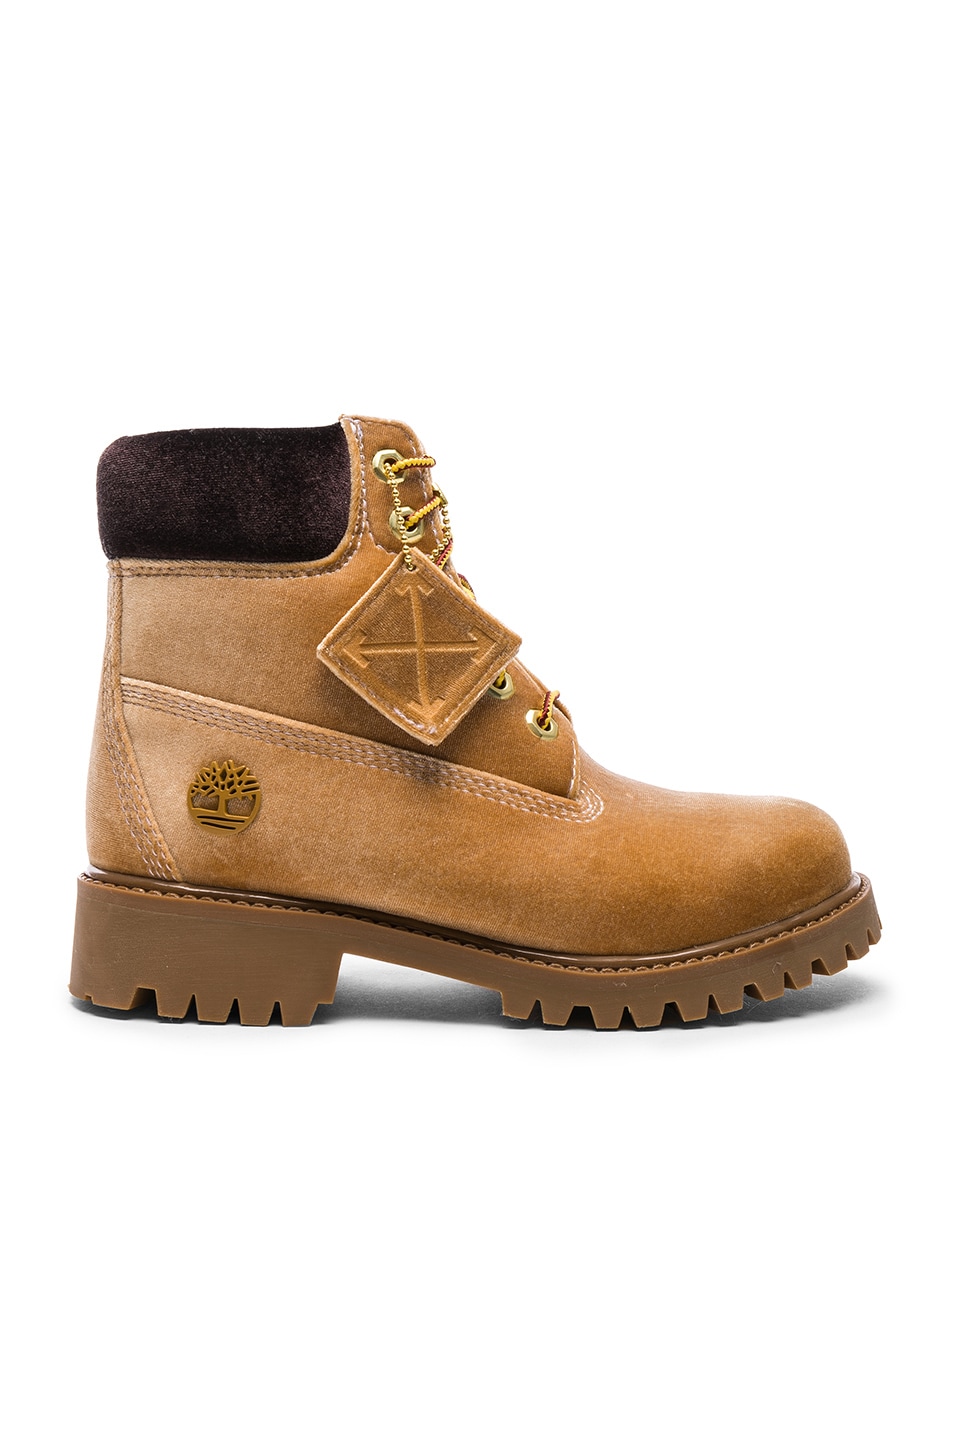 Image 1 of OFF-WHITE x Timberland Velvet Hiking Boots in Camel